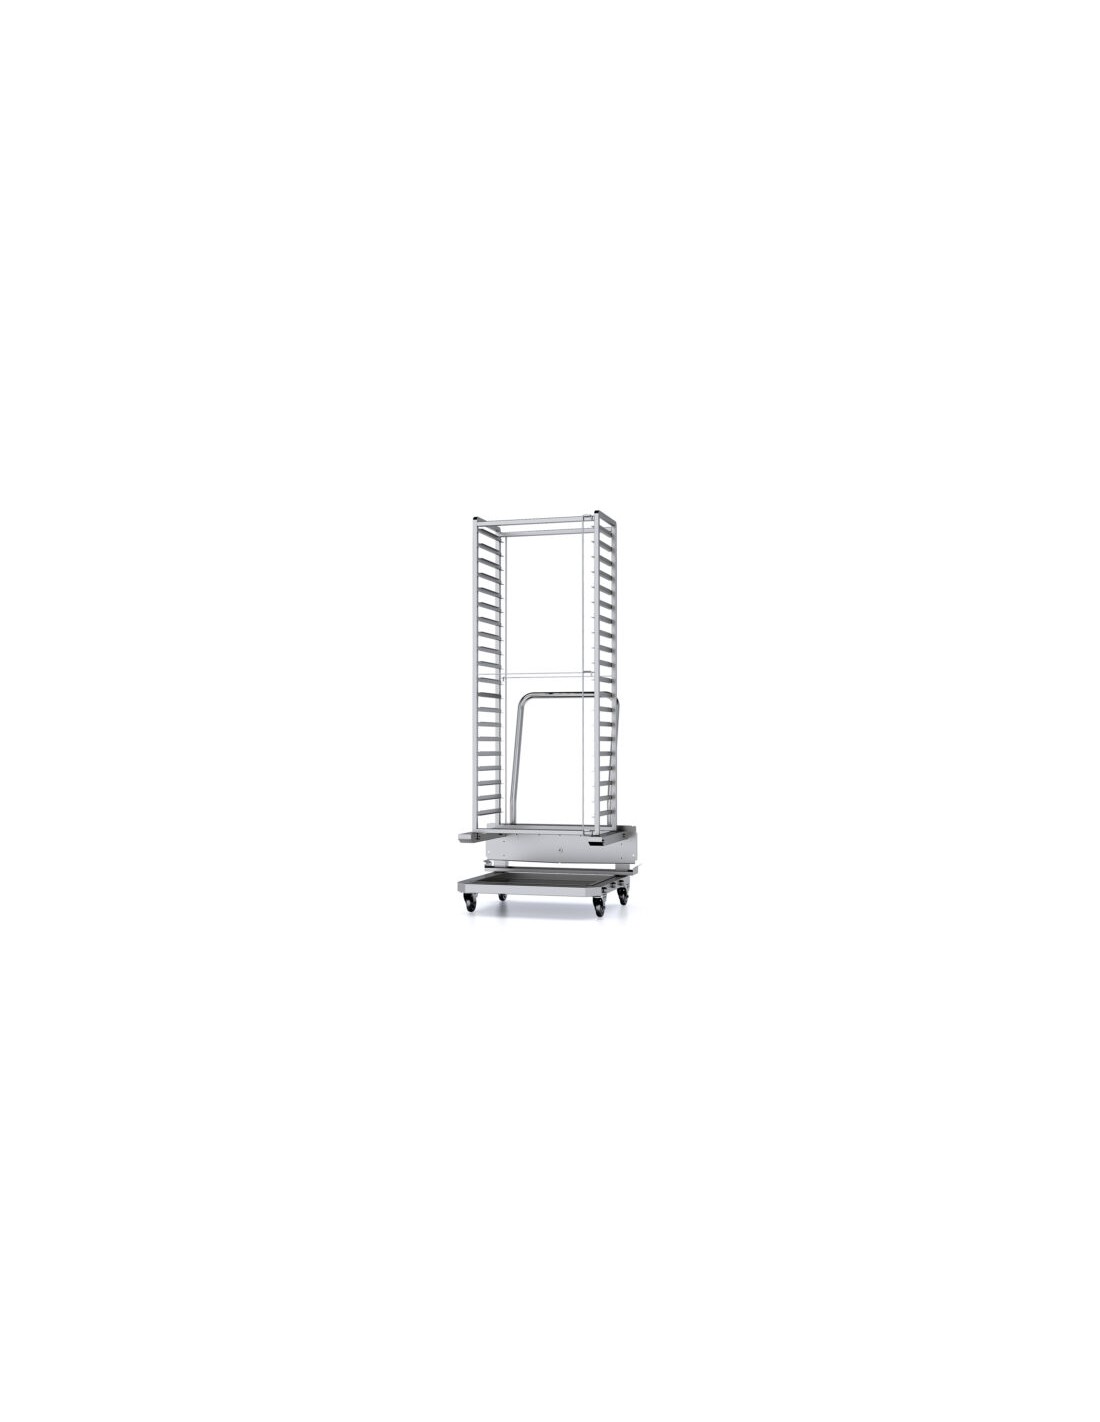 Trolley - Capacity No. 20 sheets GN 1/1 - Weight 39 kg - Dimensions cm 64.6 x 71.1 x 177.5 h